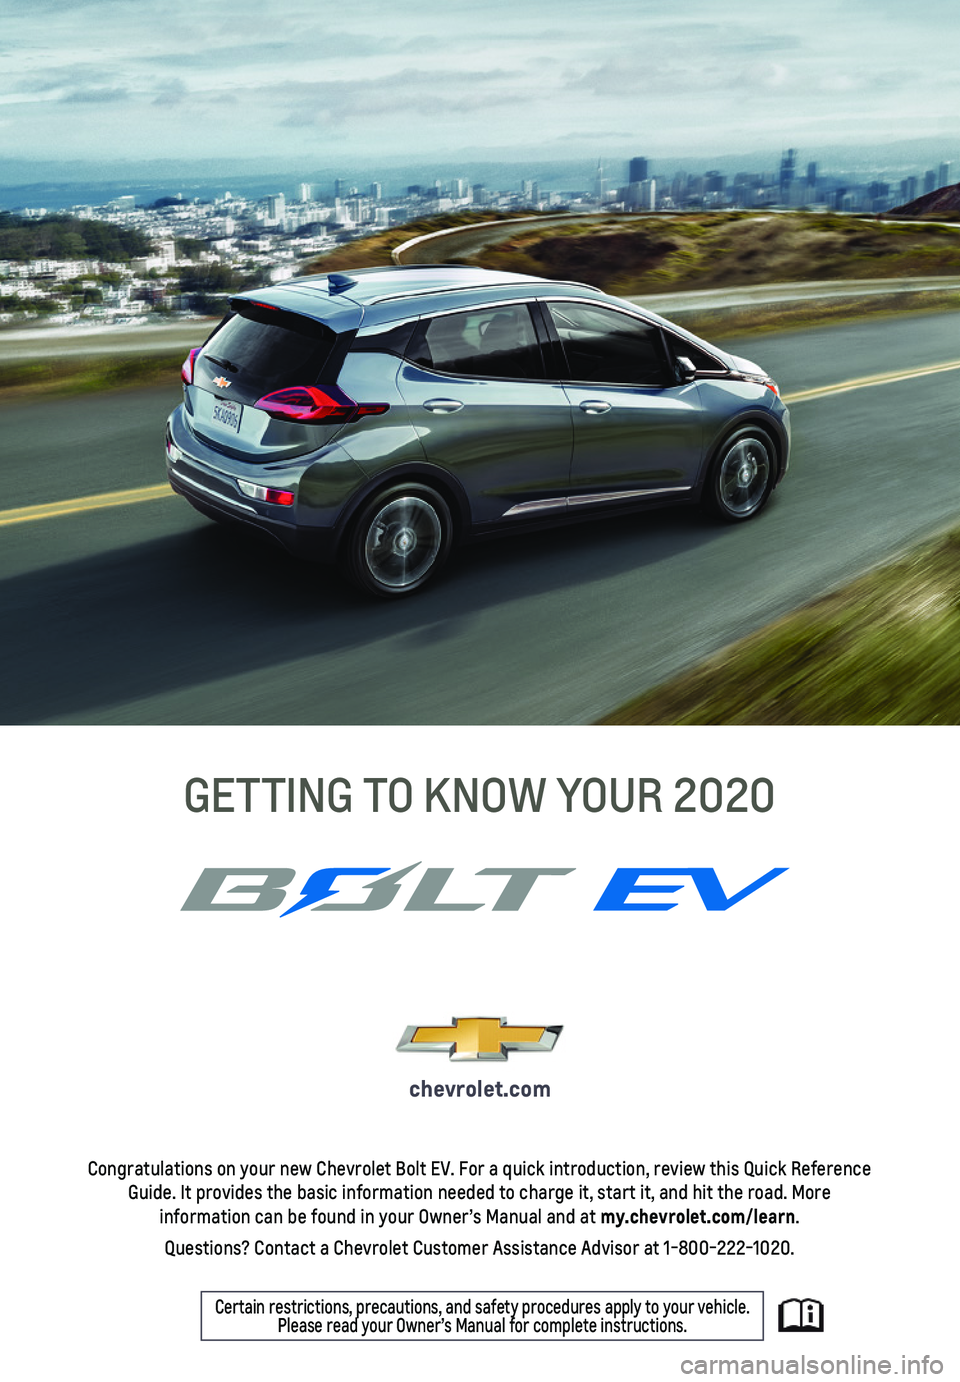 CHEVROLET BOLT EV 2020  Get To Know Guide 1
Pantone Spot Colors
Pantone300 C
Pantone
Cool
Gray 7C
Congratulations on your new Chevrolet Bolt EV. For a quick introduction,\
 review this Quick Reference Guide. It provides the basic information 